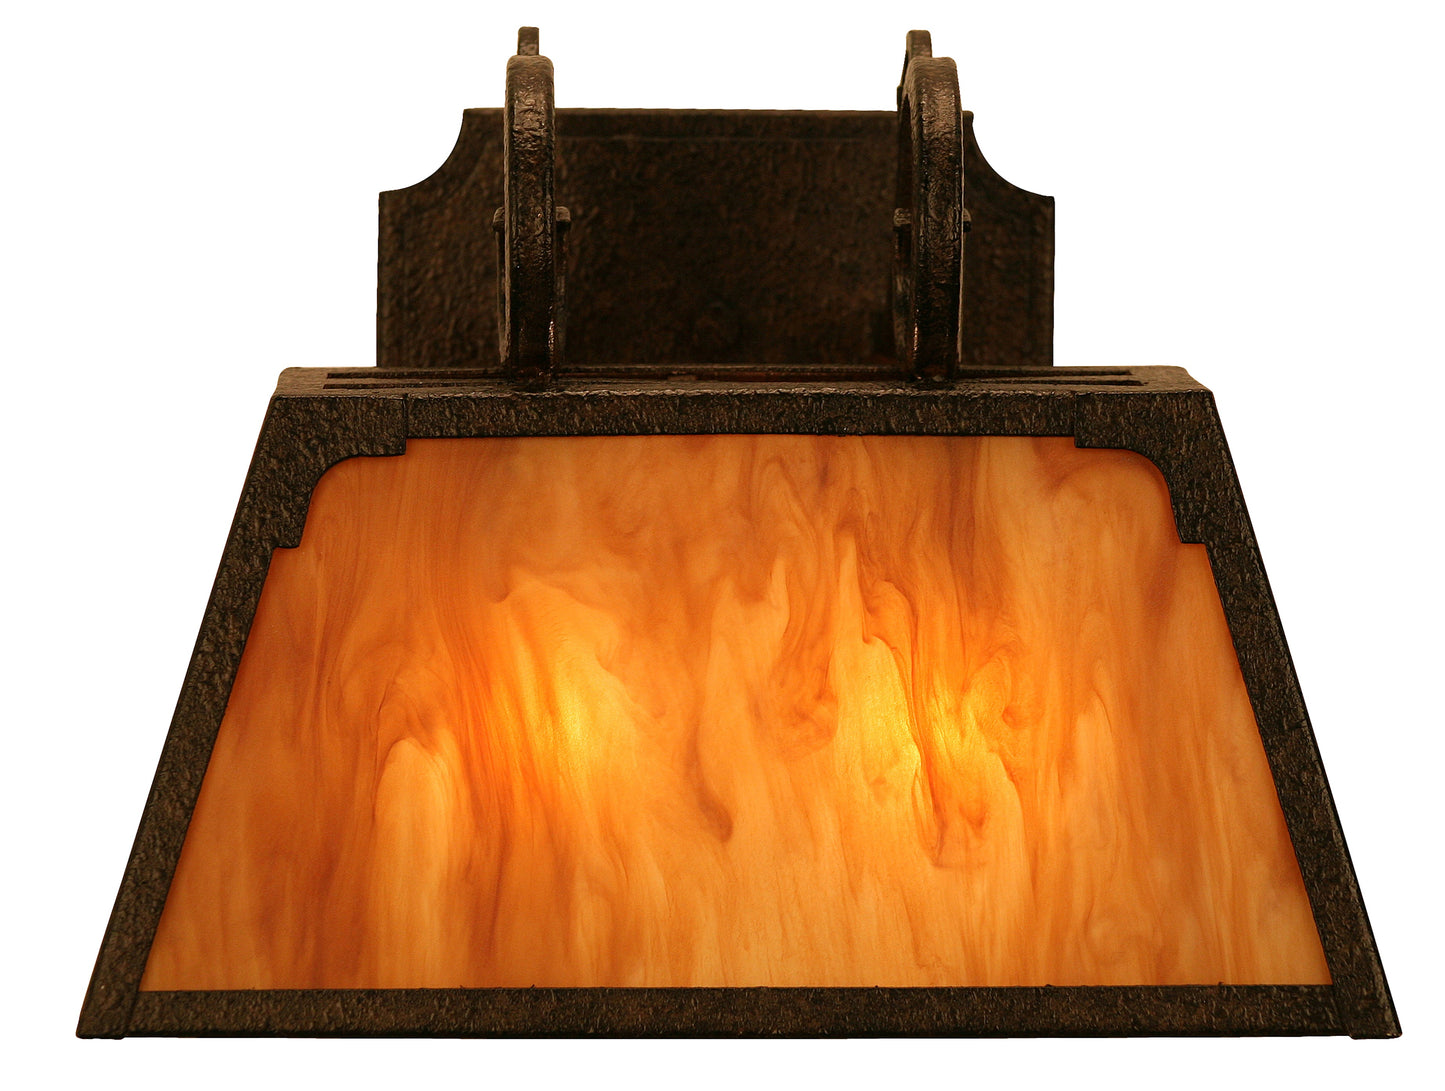 14" Dalton Wall Sconce by 2nd Ave Lighting